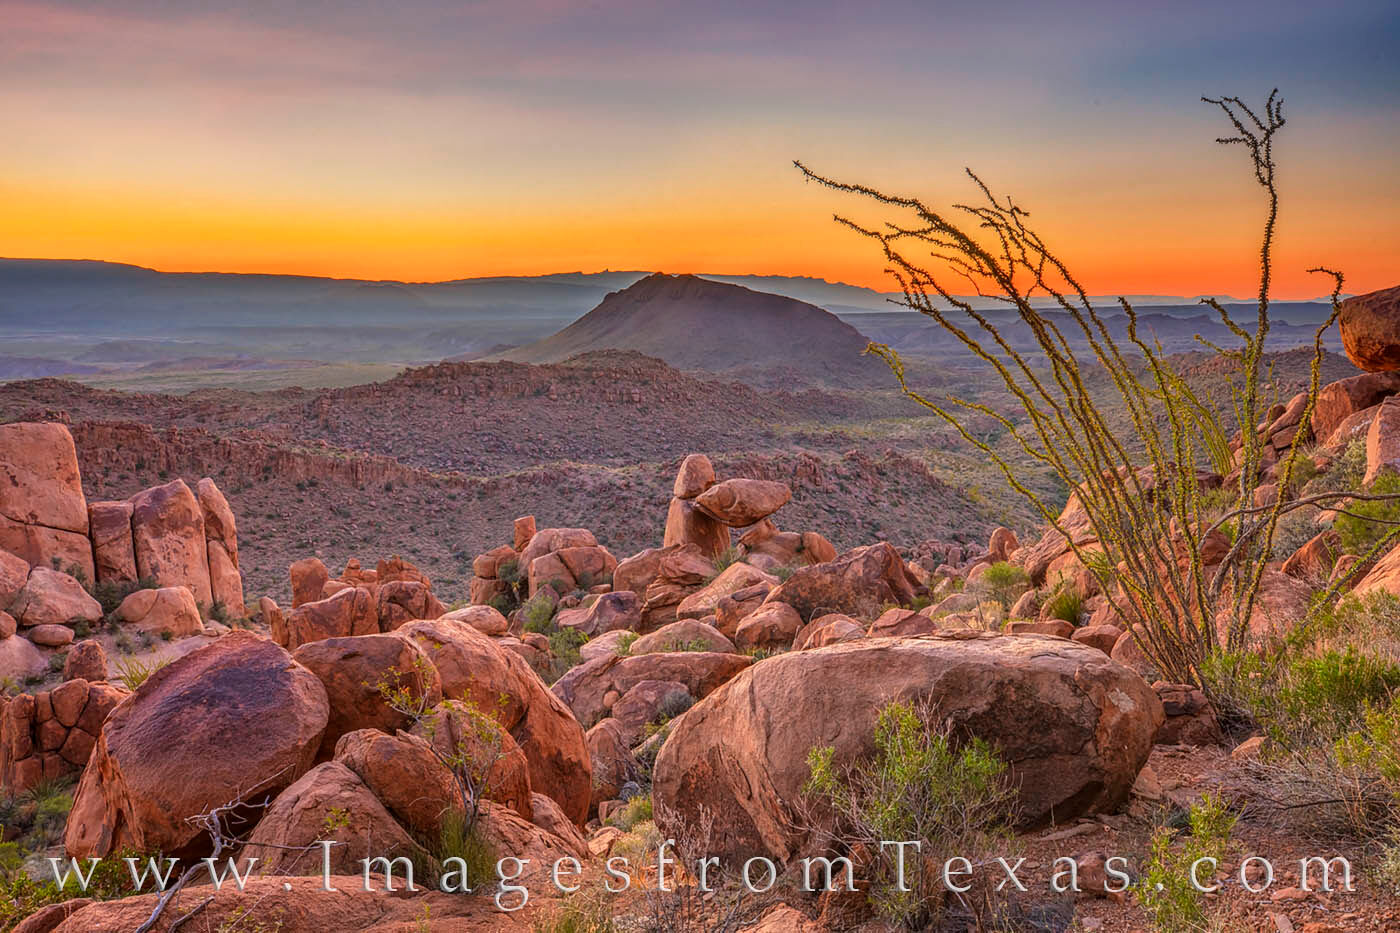 On a perfect morning in the Big Bend of Texas, an orange glow slowly spread across the slopes of the Chisos Mountain as the sun...